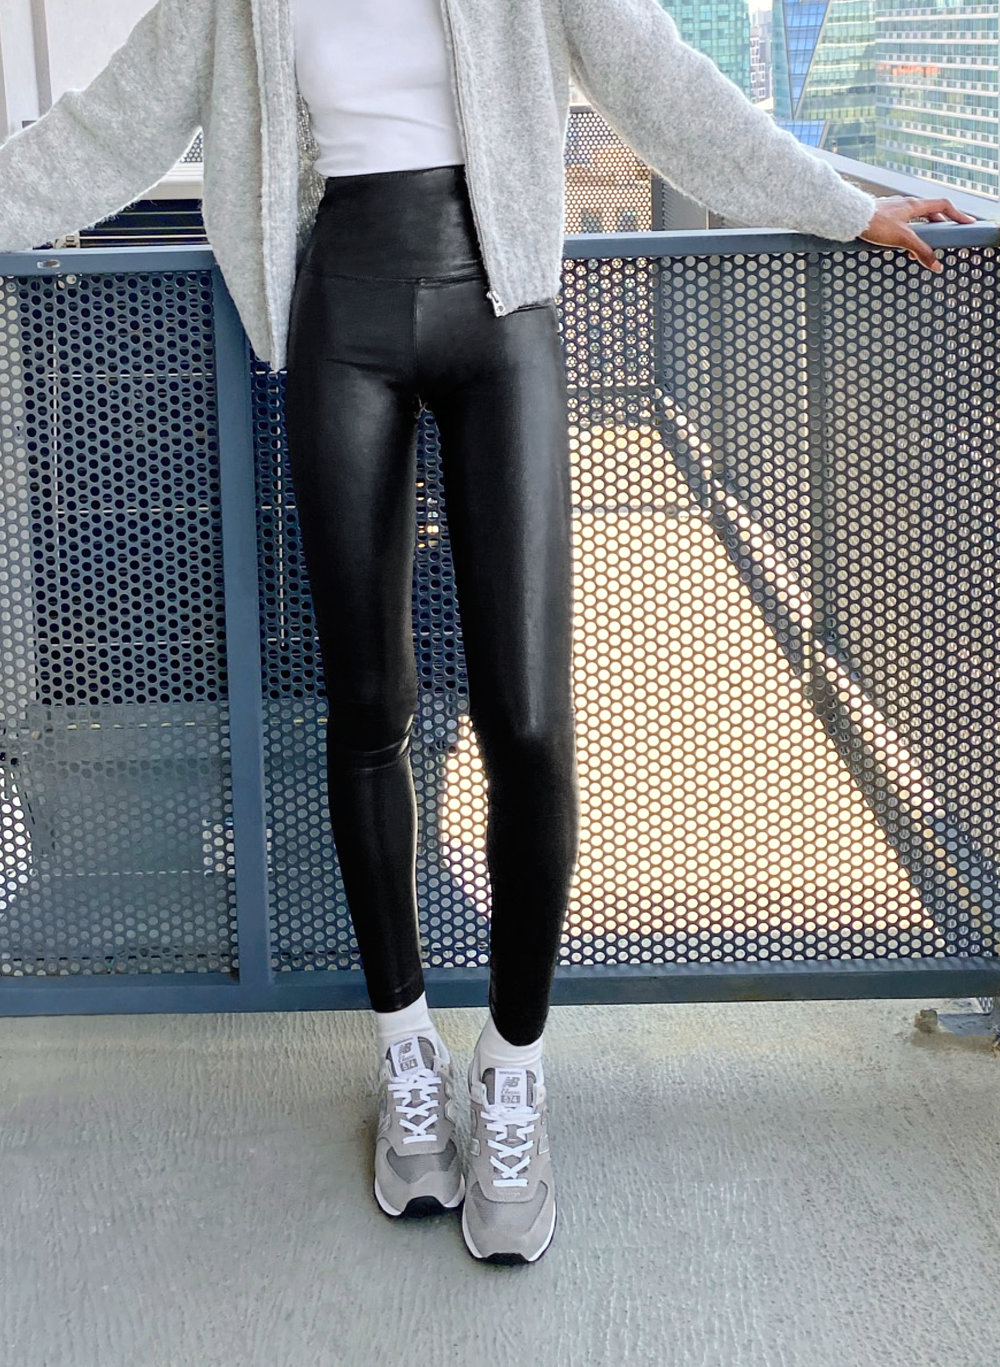 leather pants afterpay